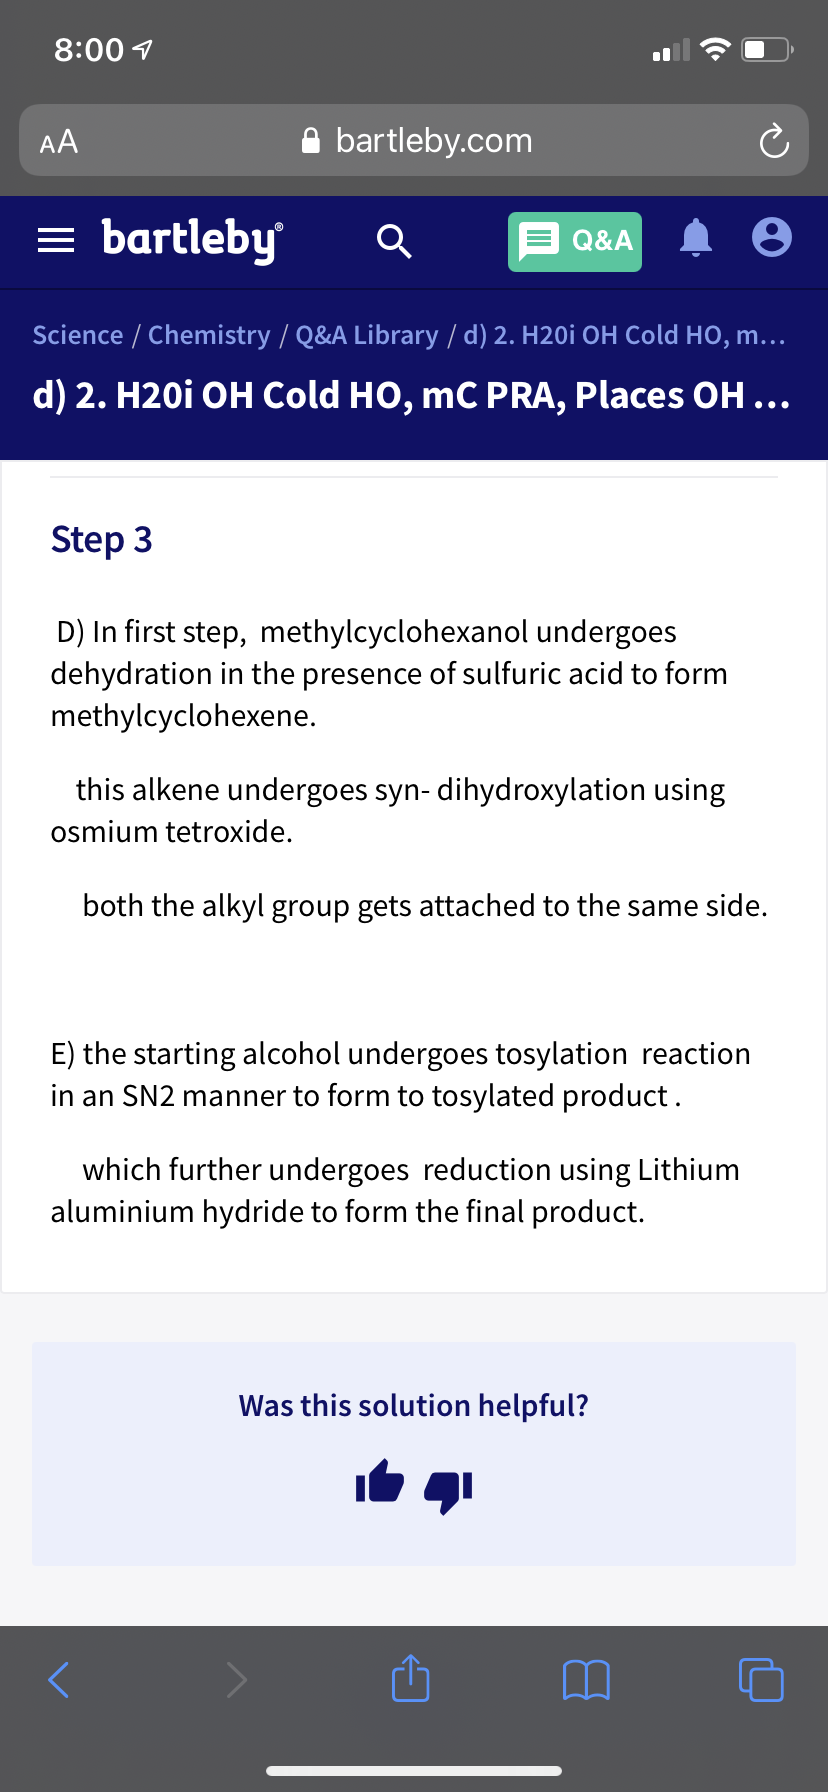 8:00 1
AA
A bartleby.com
= bartleby
Q&A
Science / Chemistry / Q&A Library / d) 2. H20i OH Cold HO, m...
d) 2. H20i OH Cold HO, mC PRA, Places OH...
Step 3
D) In first step, methylcyclohexanol undergoes
dehydration in the presence of sulfuric acid to form
methylcyclohexene.
this alkene undergoes syn- dihydroxylation using
osmium tetroxide.
both the alkyl group gets attached to the same side.
E) the starting alcohol undergoes tosylation reaction
in an SN2 manner to form to tosylated product.
which further undergoes reduction using Lithium
aluminium hydride to form the final product.
Was this solution helpful?
